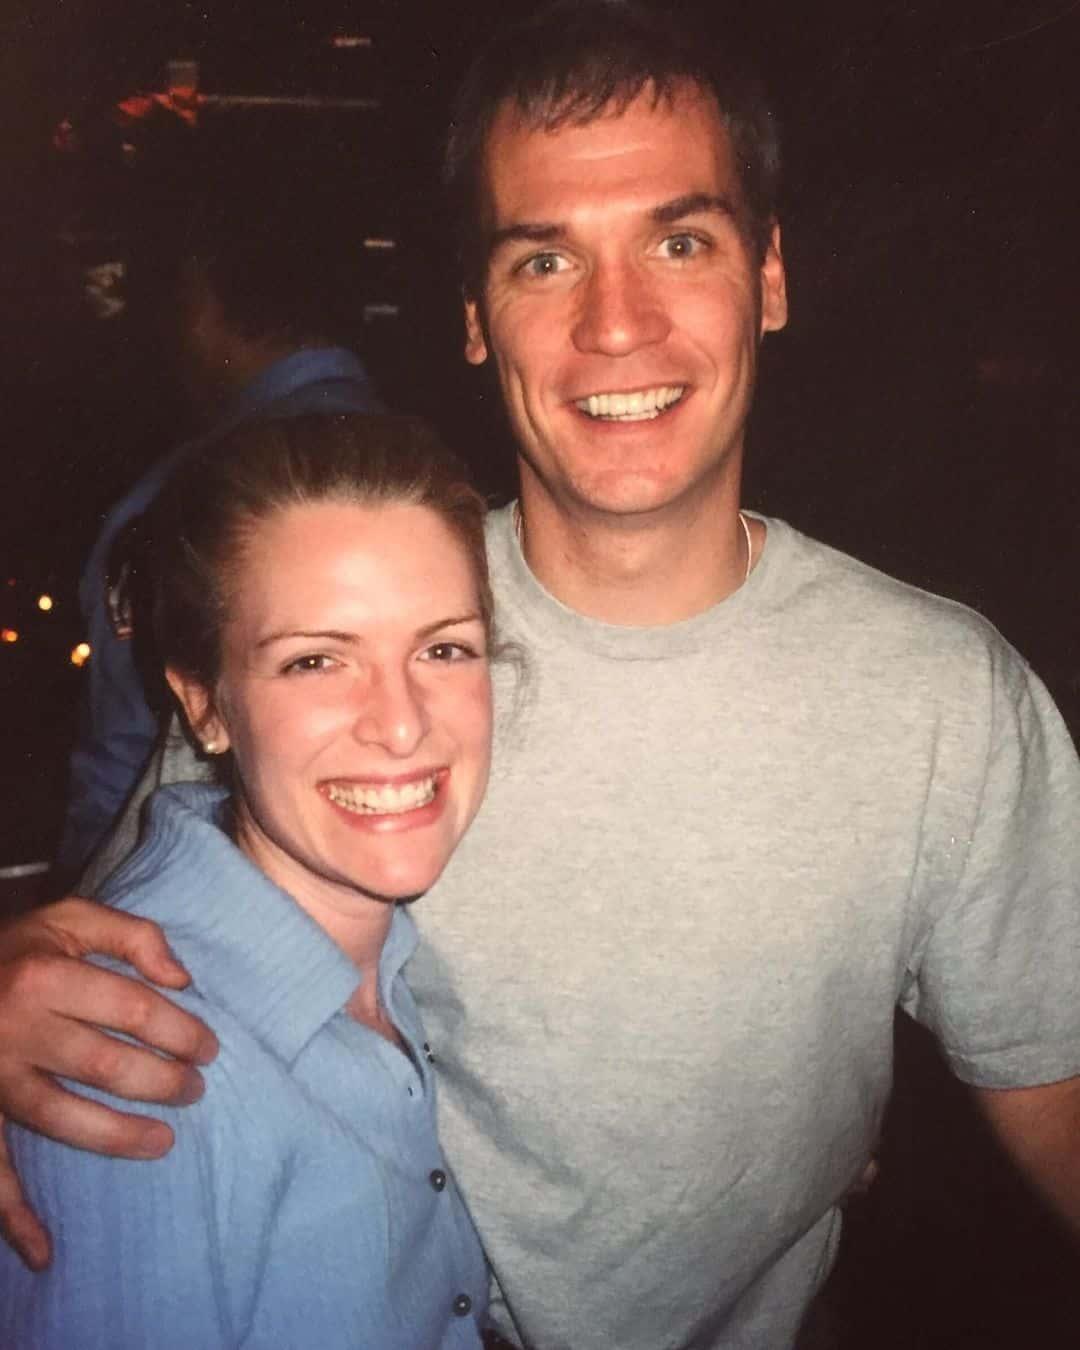 Janice Dean and Sean Newman together years ago (@janicedeanfnc/Instagram)